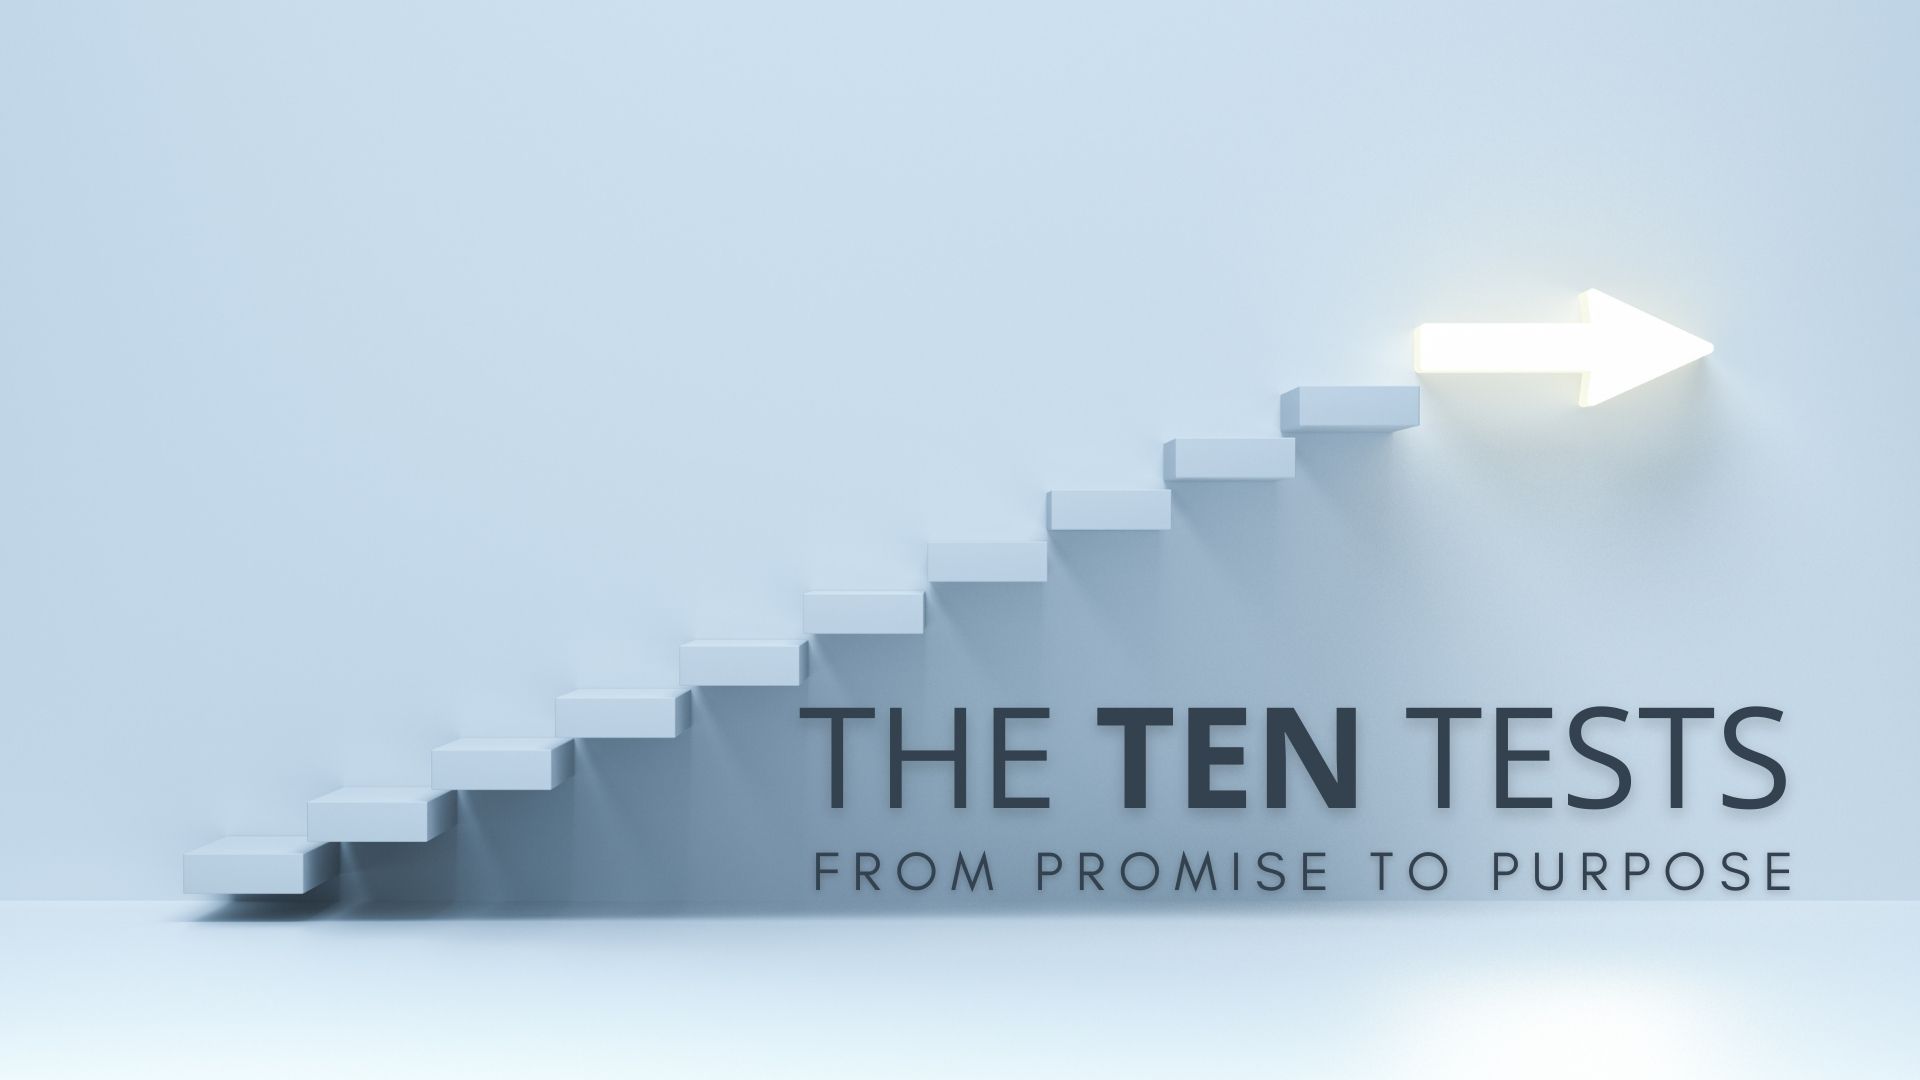 The TEN Tests: From Promise to Purpose - The Potiphar Test